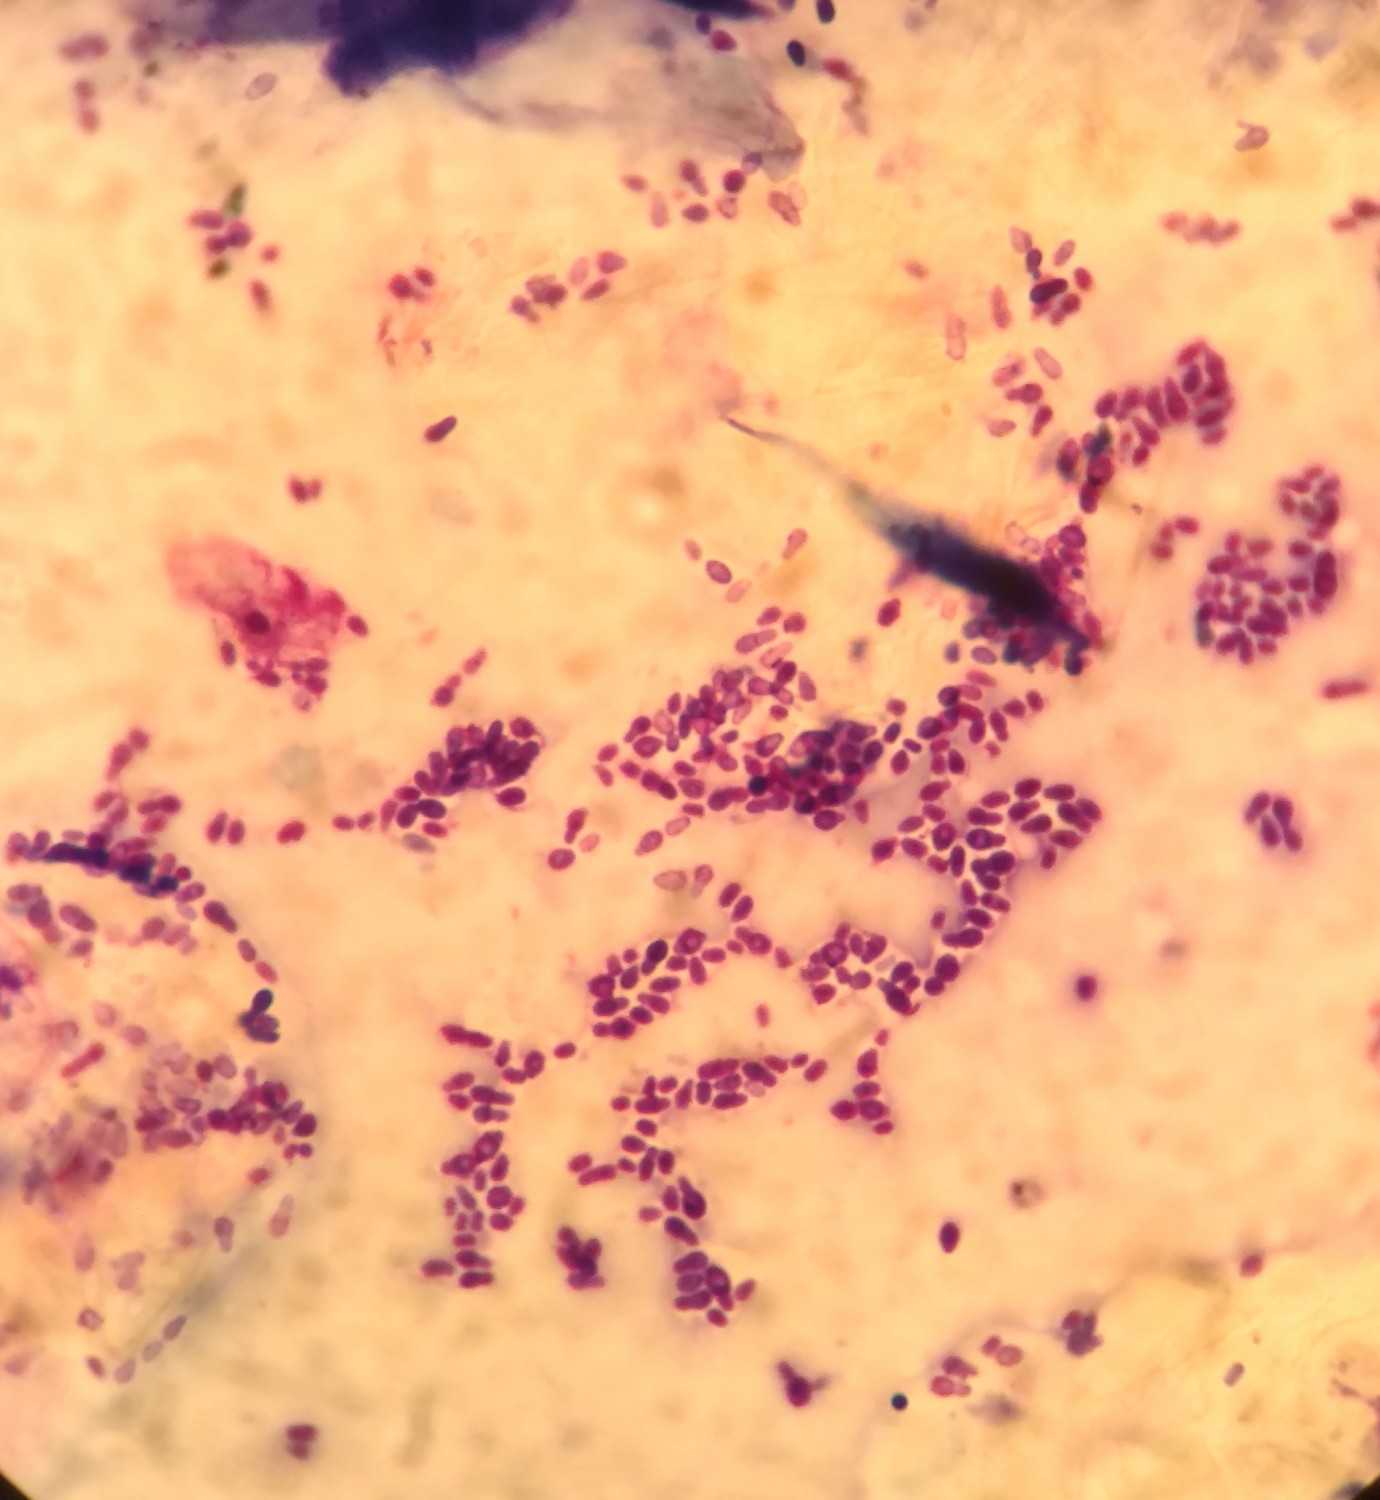 both ear cytology samples showing yeast overgrowth